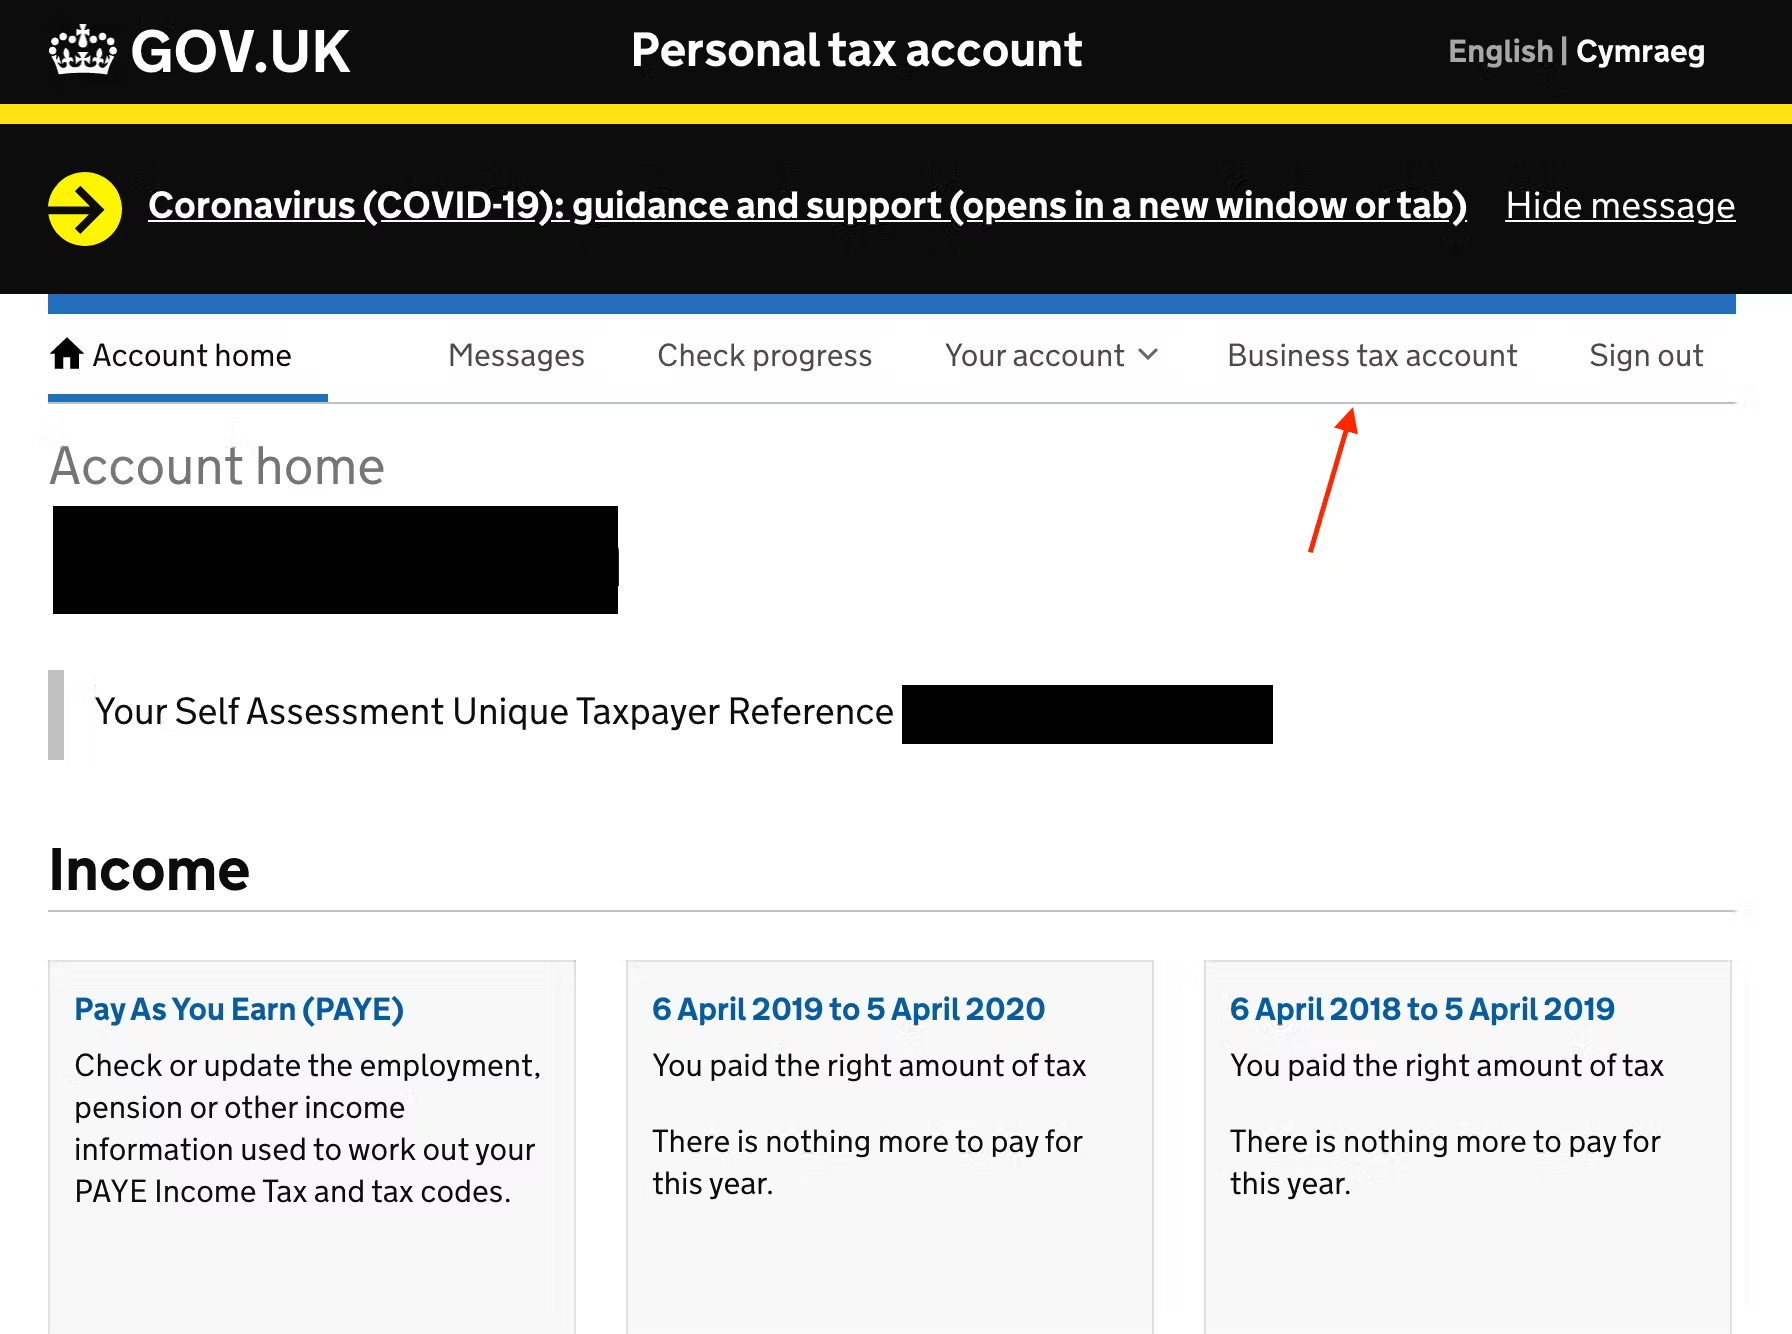 Select ‘Business tax account’ 